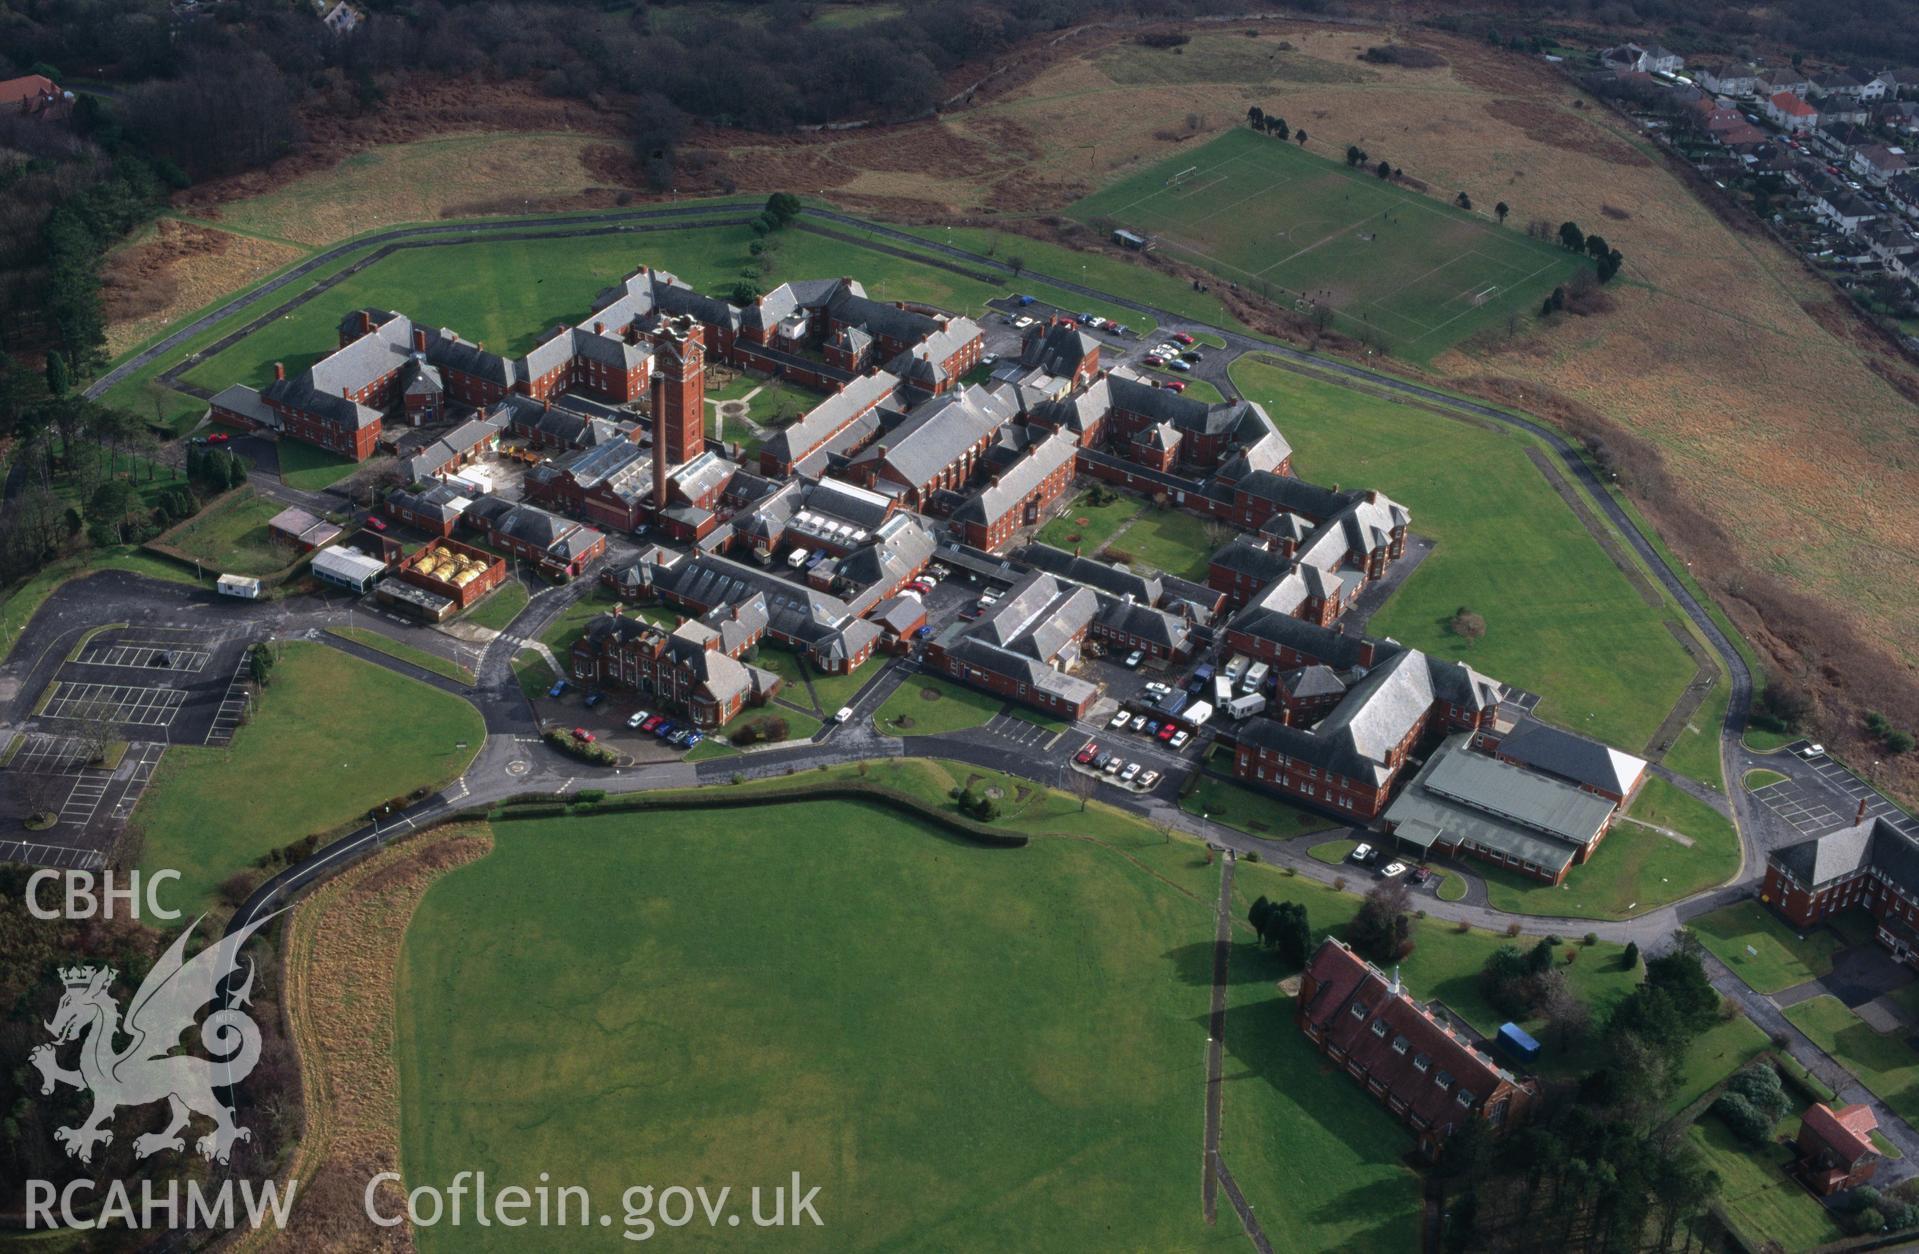 Slide of RCAHMW colour oblique aerial photograph of Cefn Coed Hospital, taken by C.R. Musson, 15/2/1997.